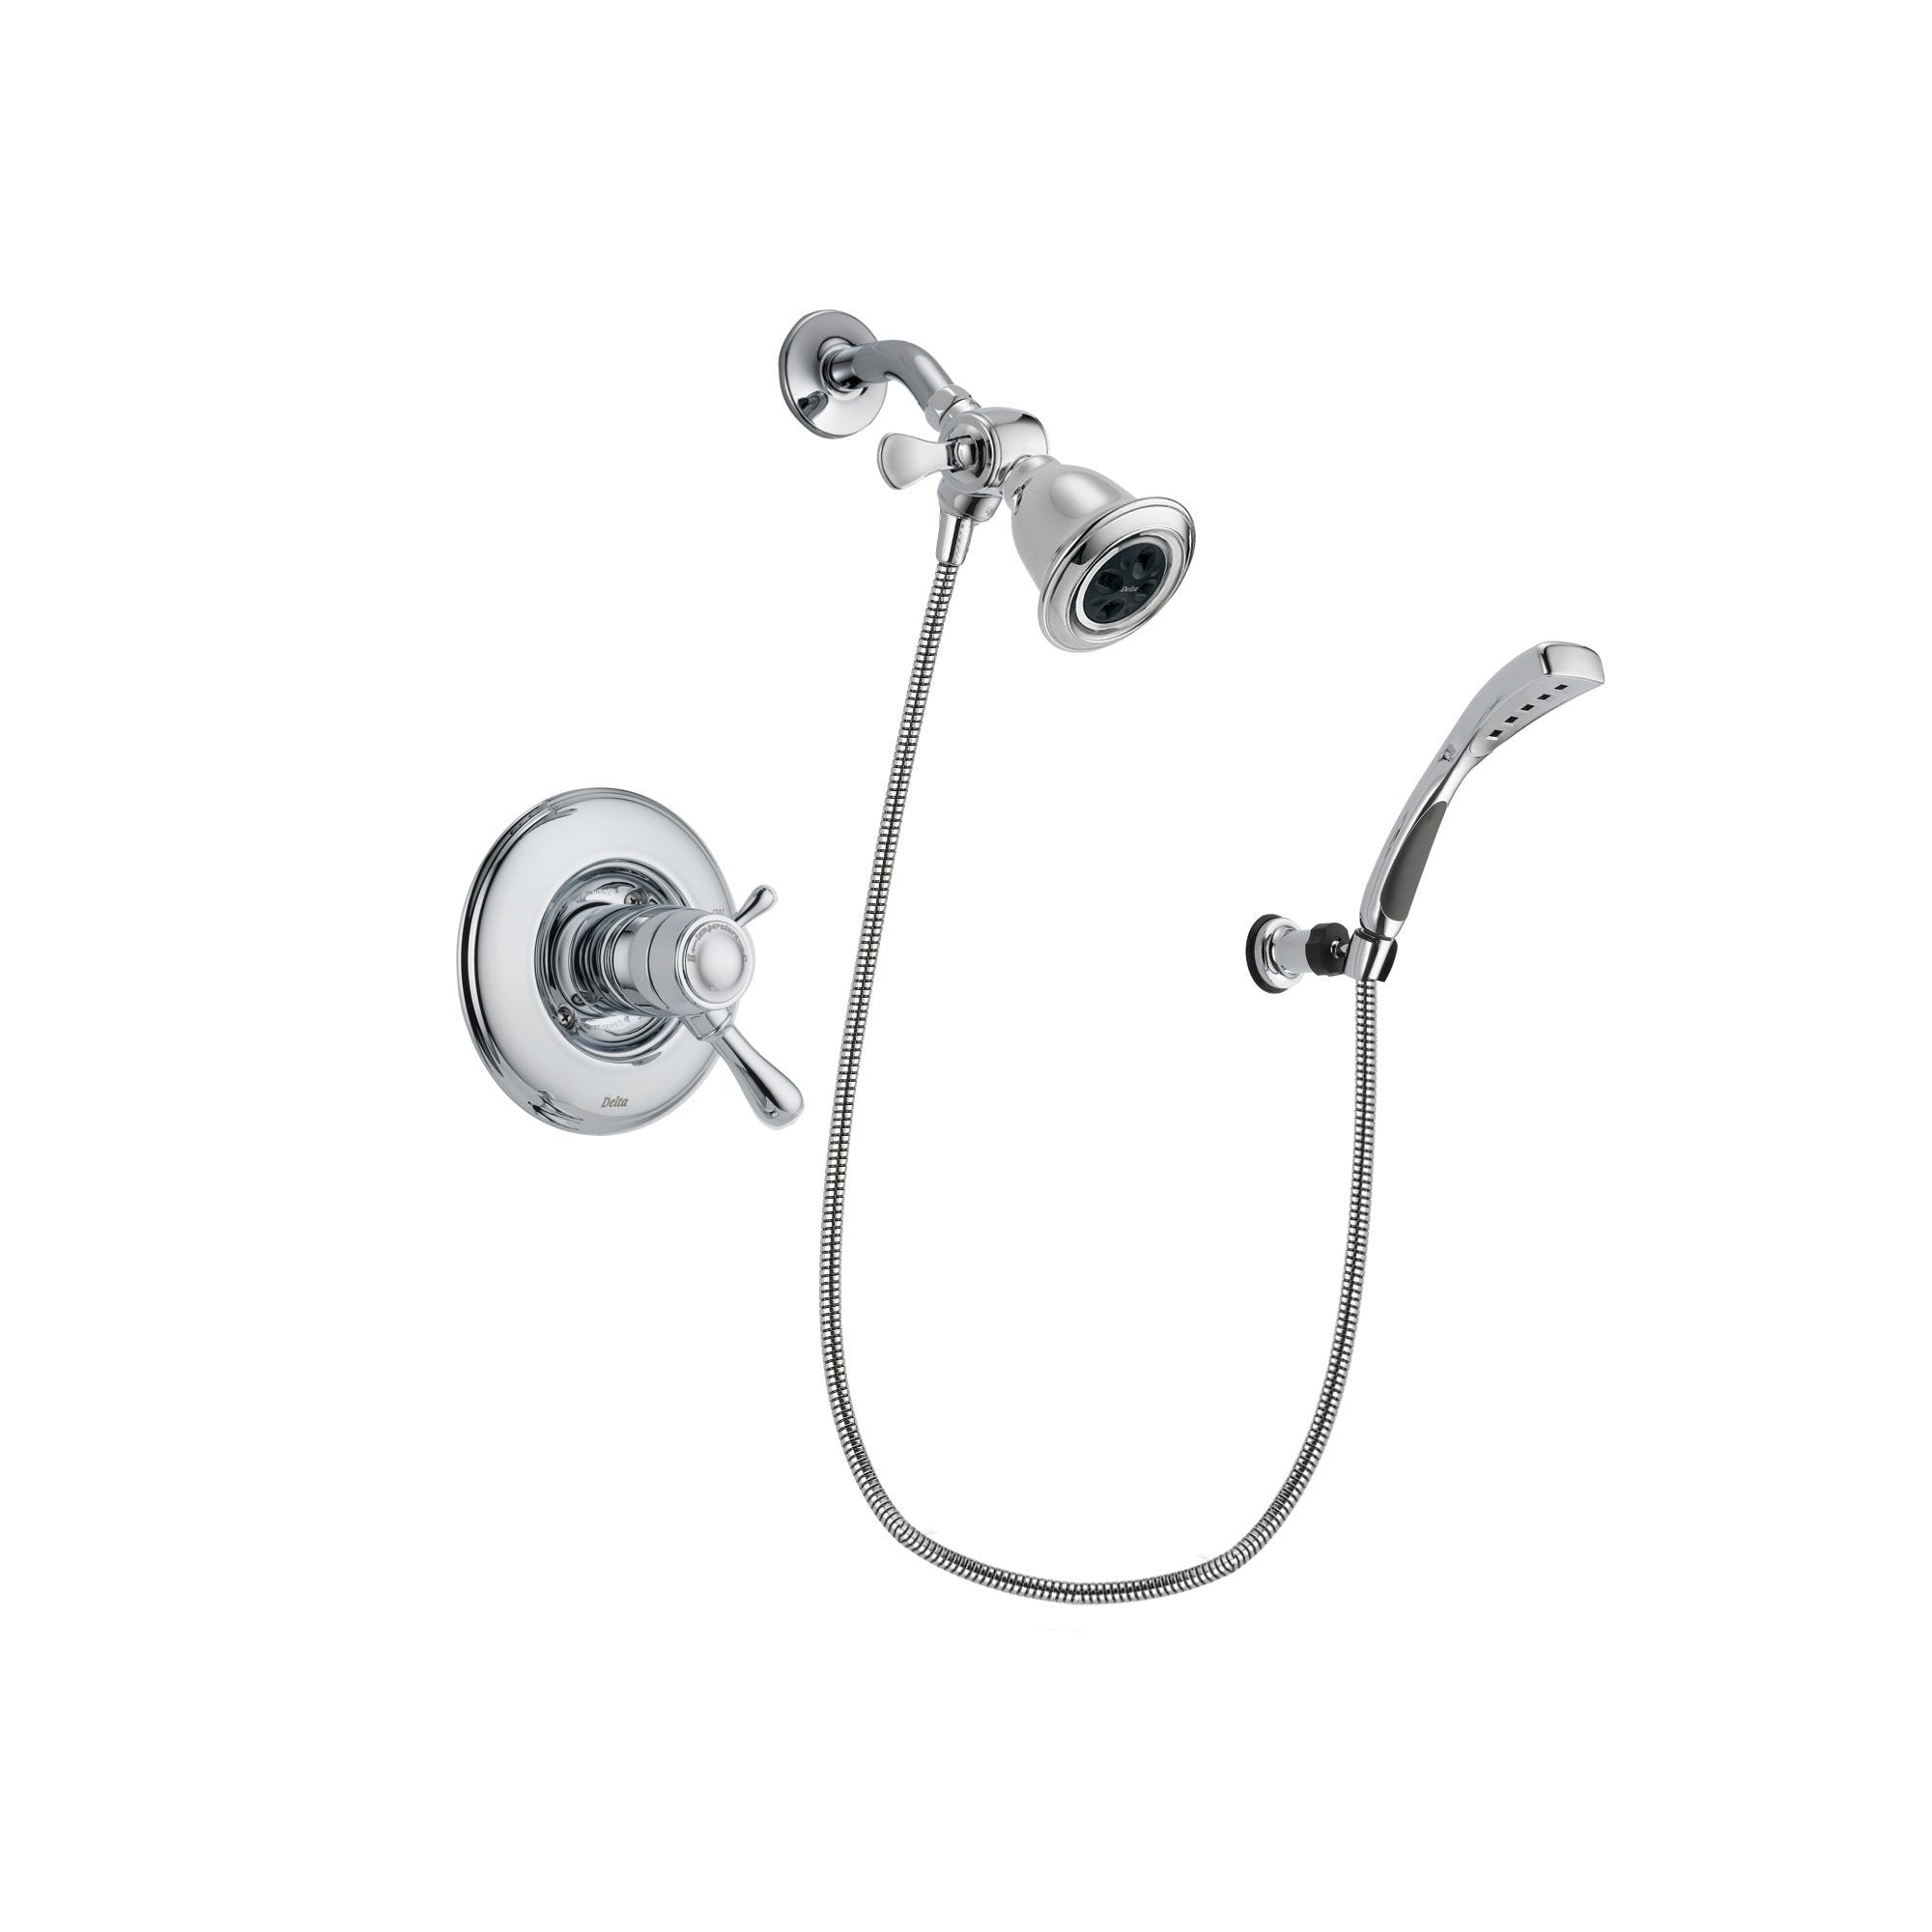 Delta Leland Chrome Finish Thermostatic Shower Faucet System Package with Water Efficient Showerhead and Wall-Mount Bracket with Handheld Shower Spray Includes Rough-in Valve DSP1008V